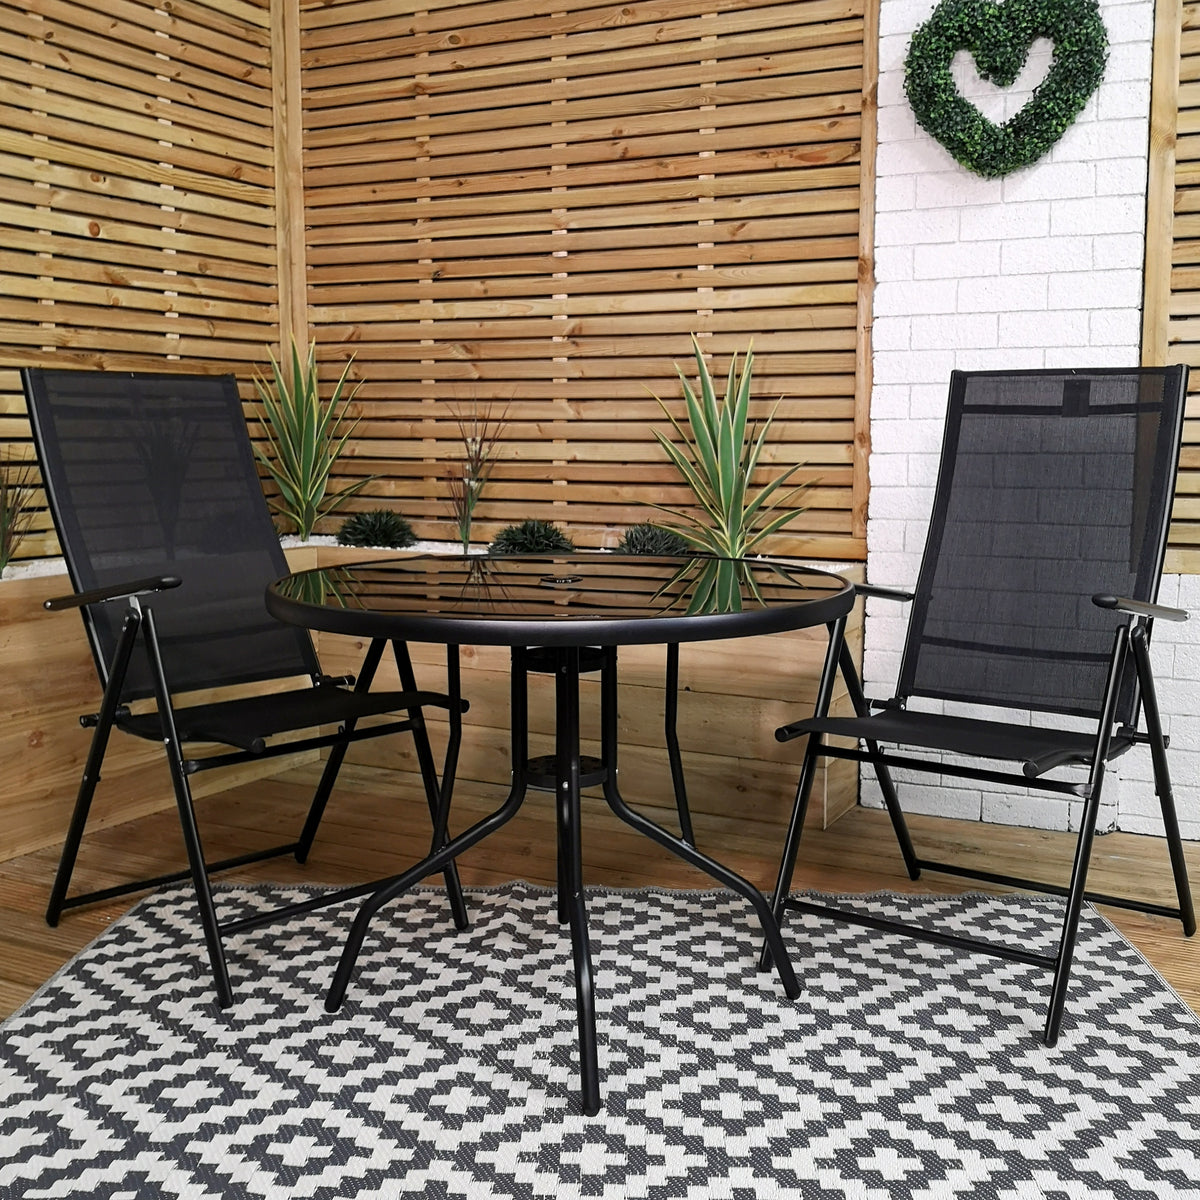 Outdoor 2 Person Round Glass Top Garden Patio Dining Table Chairs Set